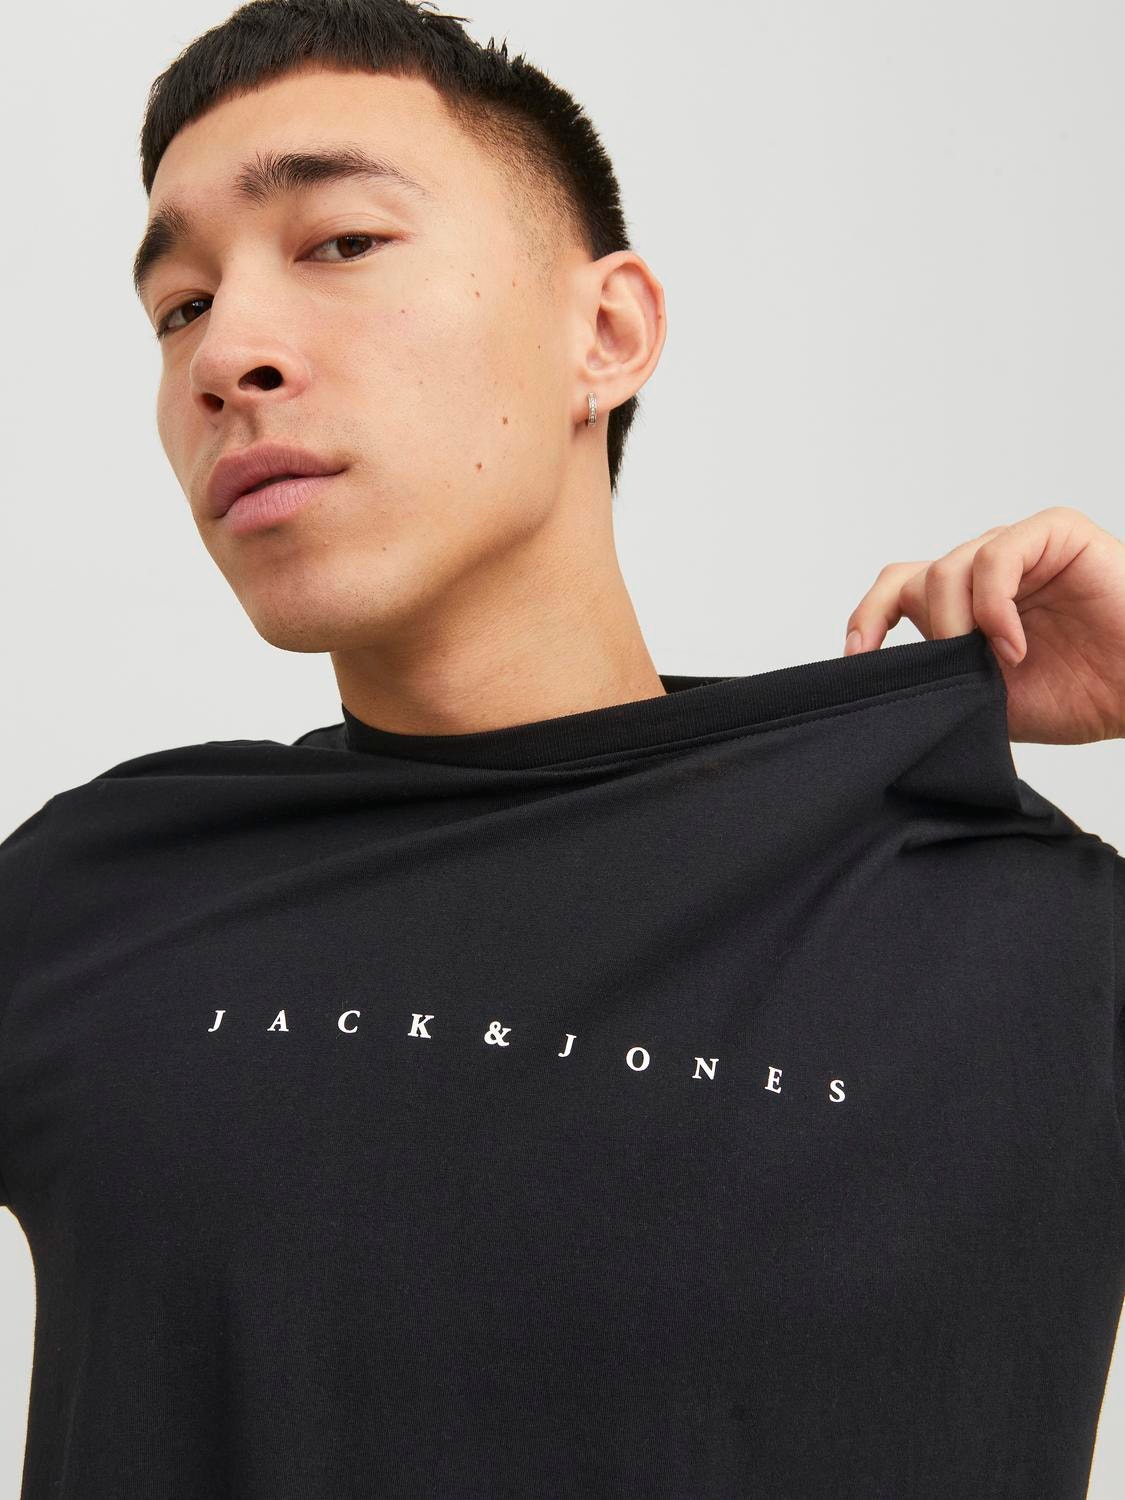 Jack and Jones T Shirts - Buy Jack and Jones T Shirts Online in